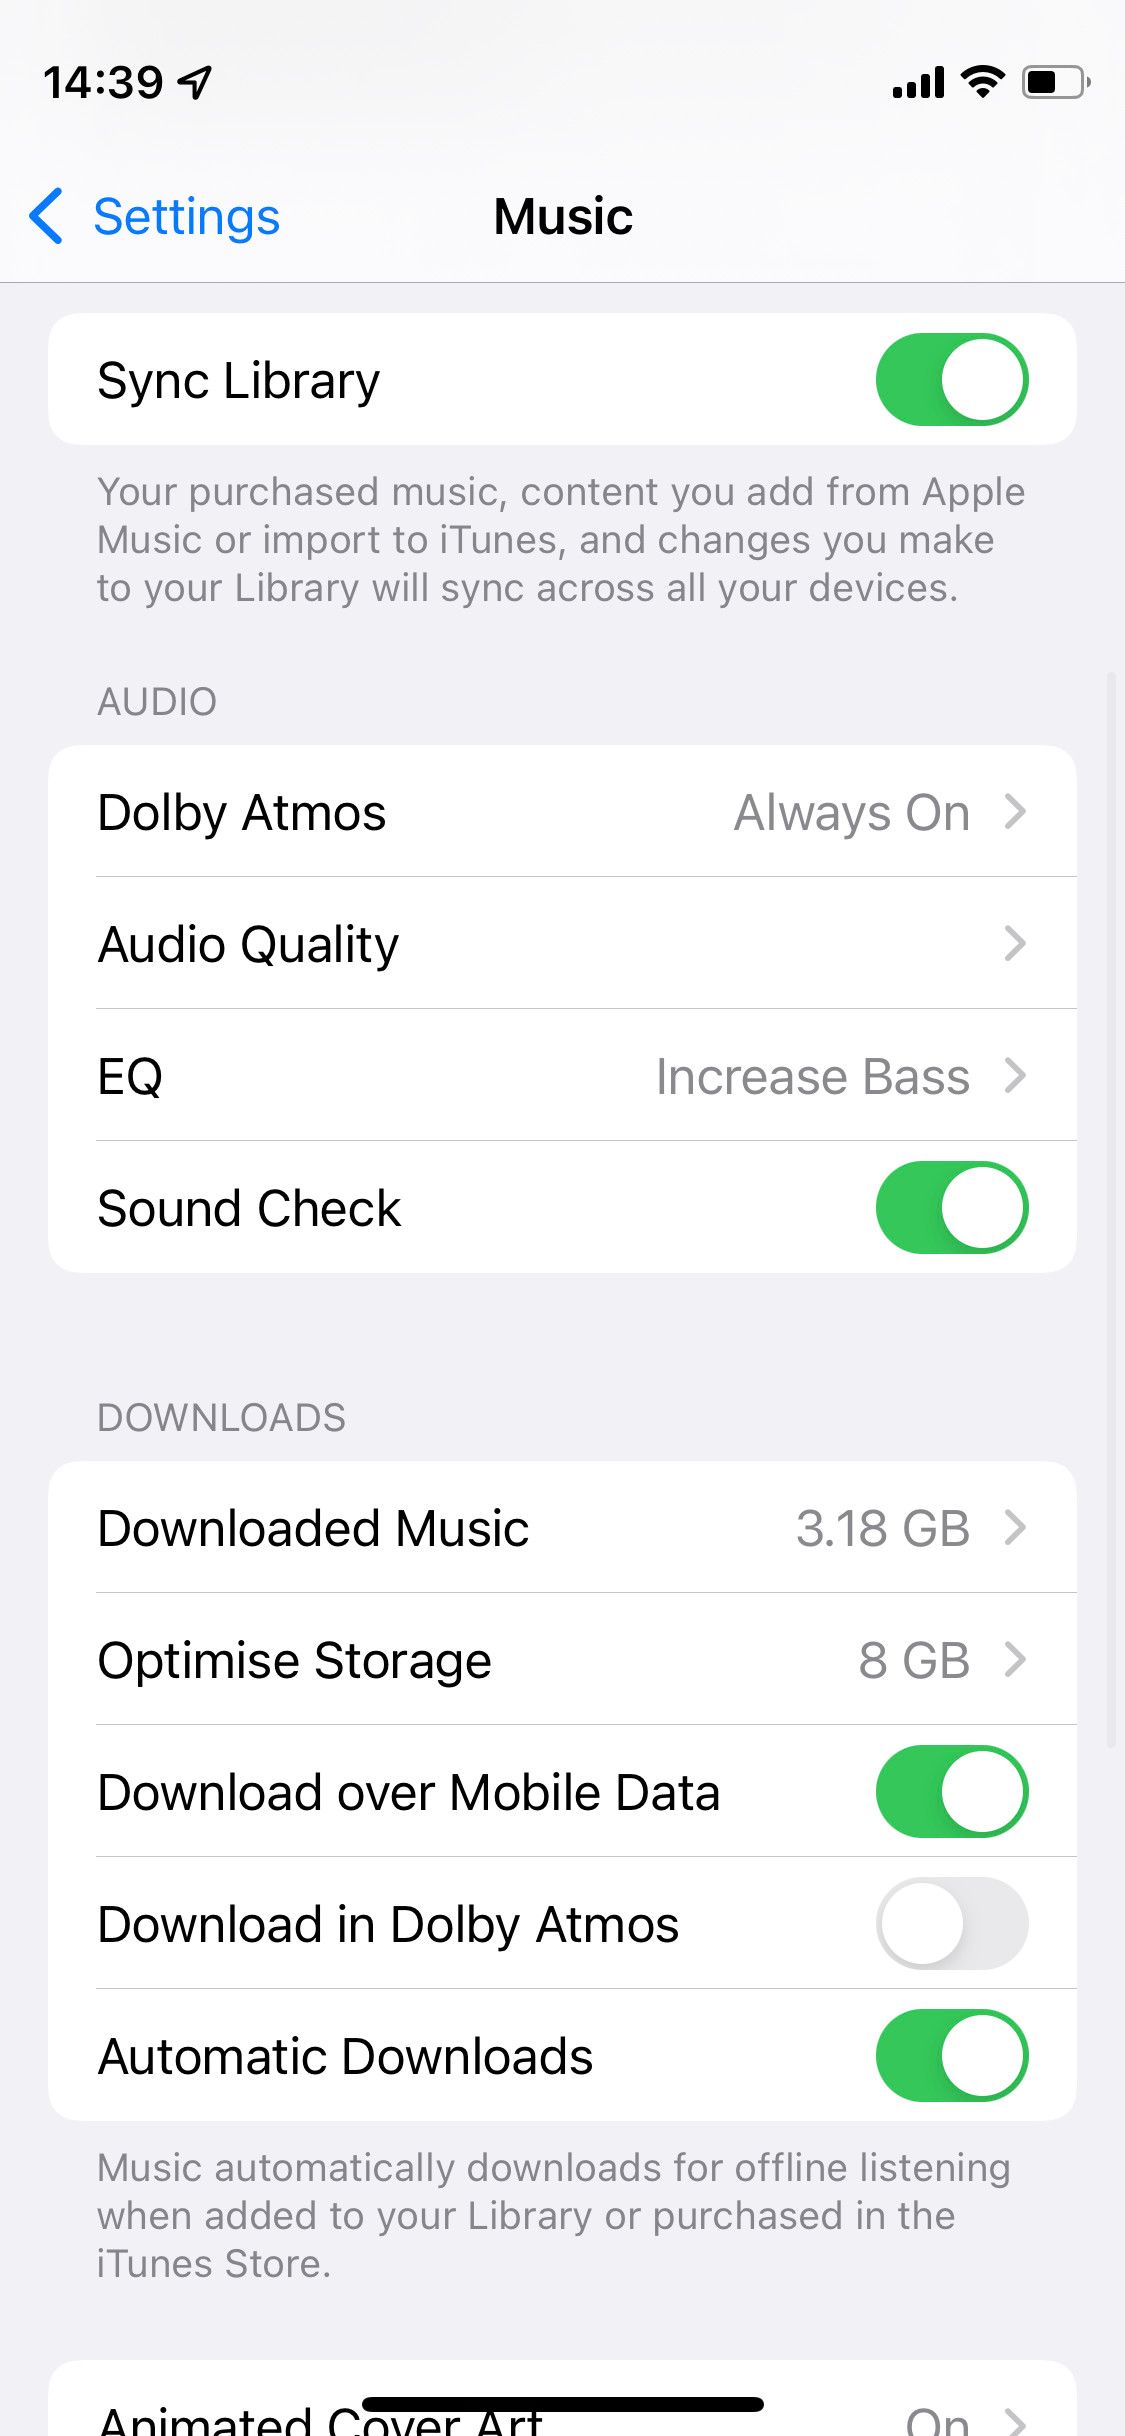 Audio quality option in iPhone settings